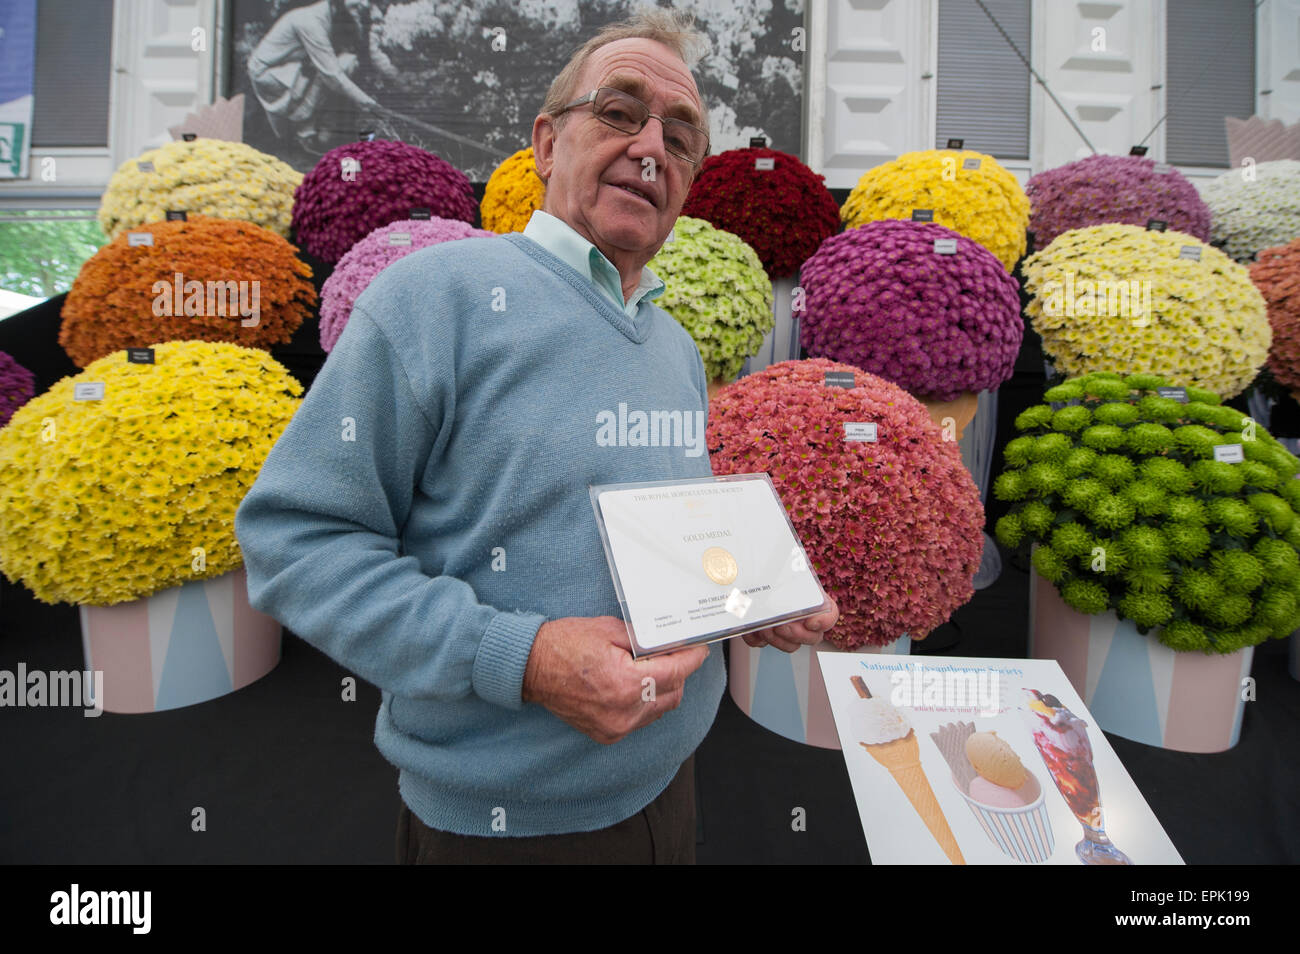 2015 RHS Chelsea Flower Show Opening Day, Royal Hospital Chelsea, London, UK. 19th May, 2015. National Chrysanthemum Society Gold Medal stand in The Great Pavilion with blooms depicting ice cream flavours. Credit:  Malcolm Park editorial/Alamy Live News Stock Photo